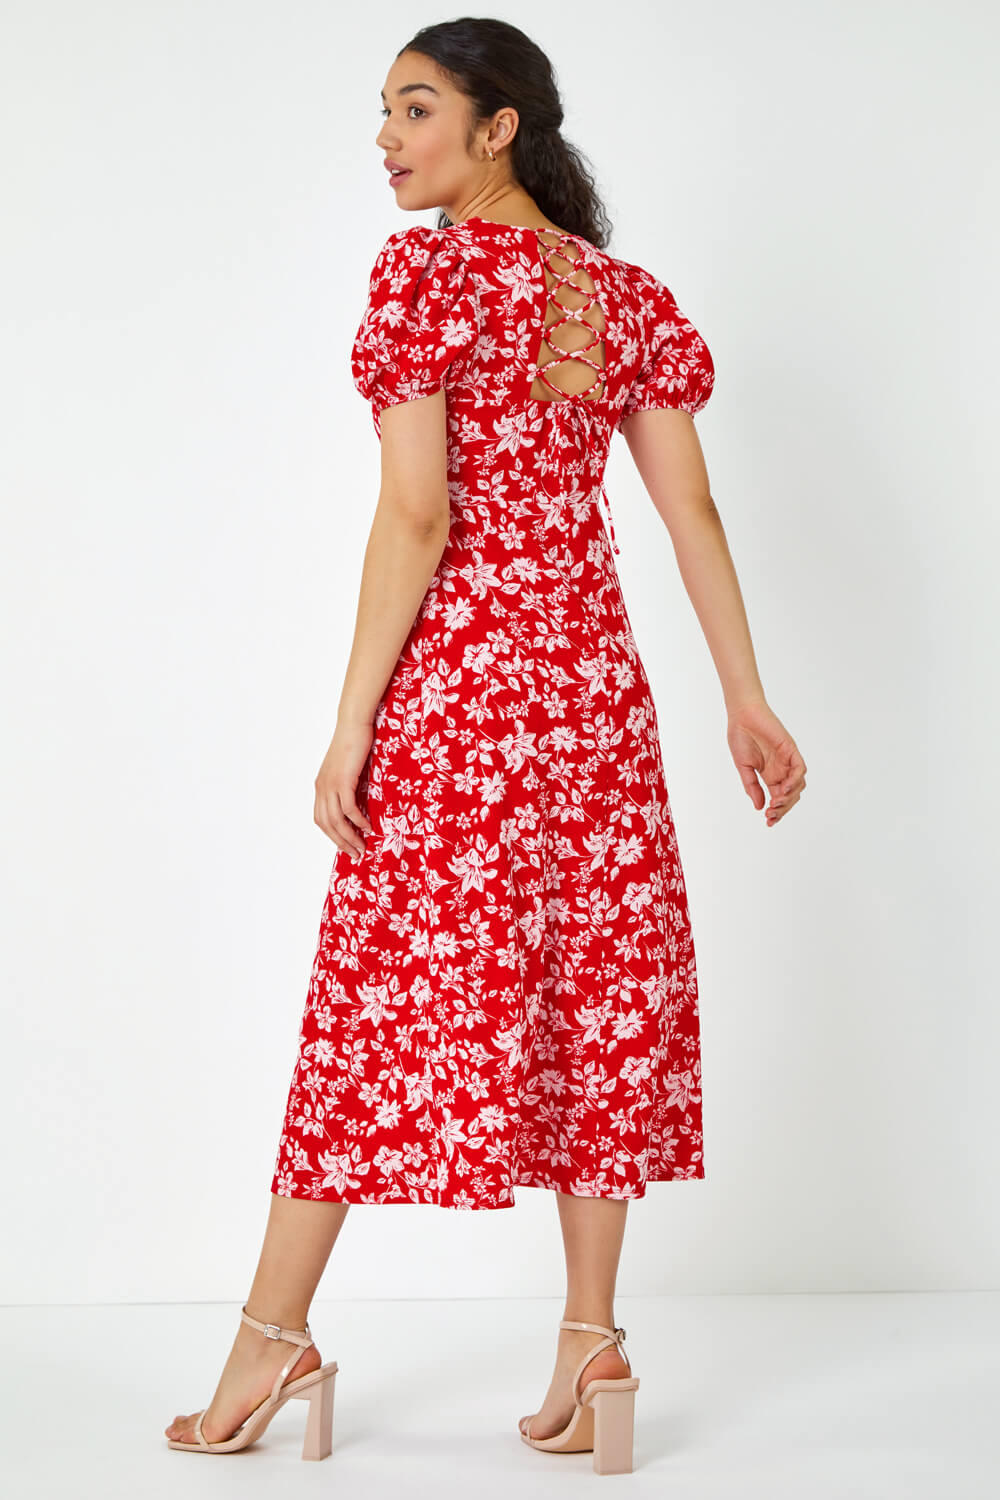 Red Floral Print Lace Back Midi Dress, Image 3 of 5